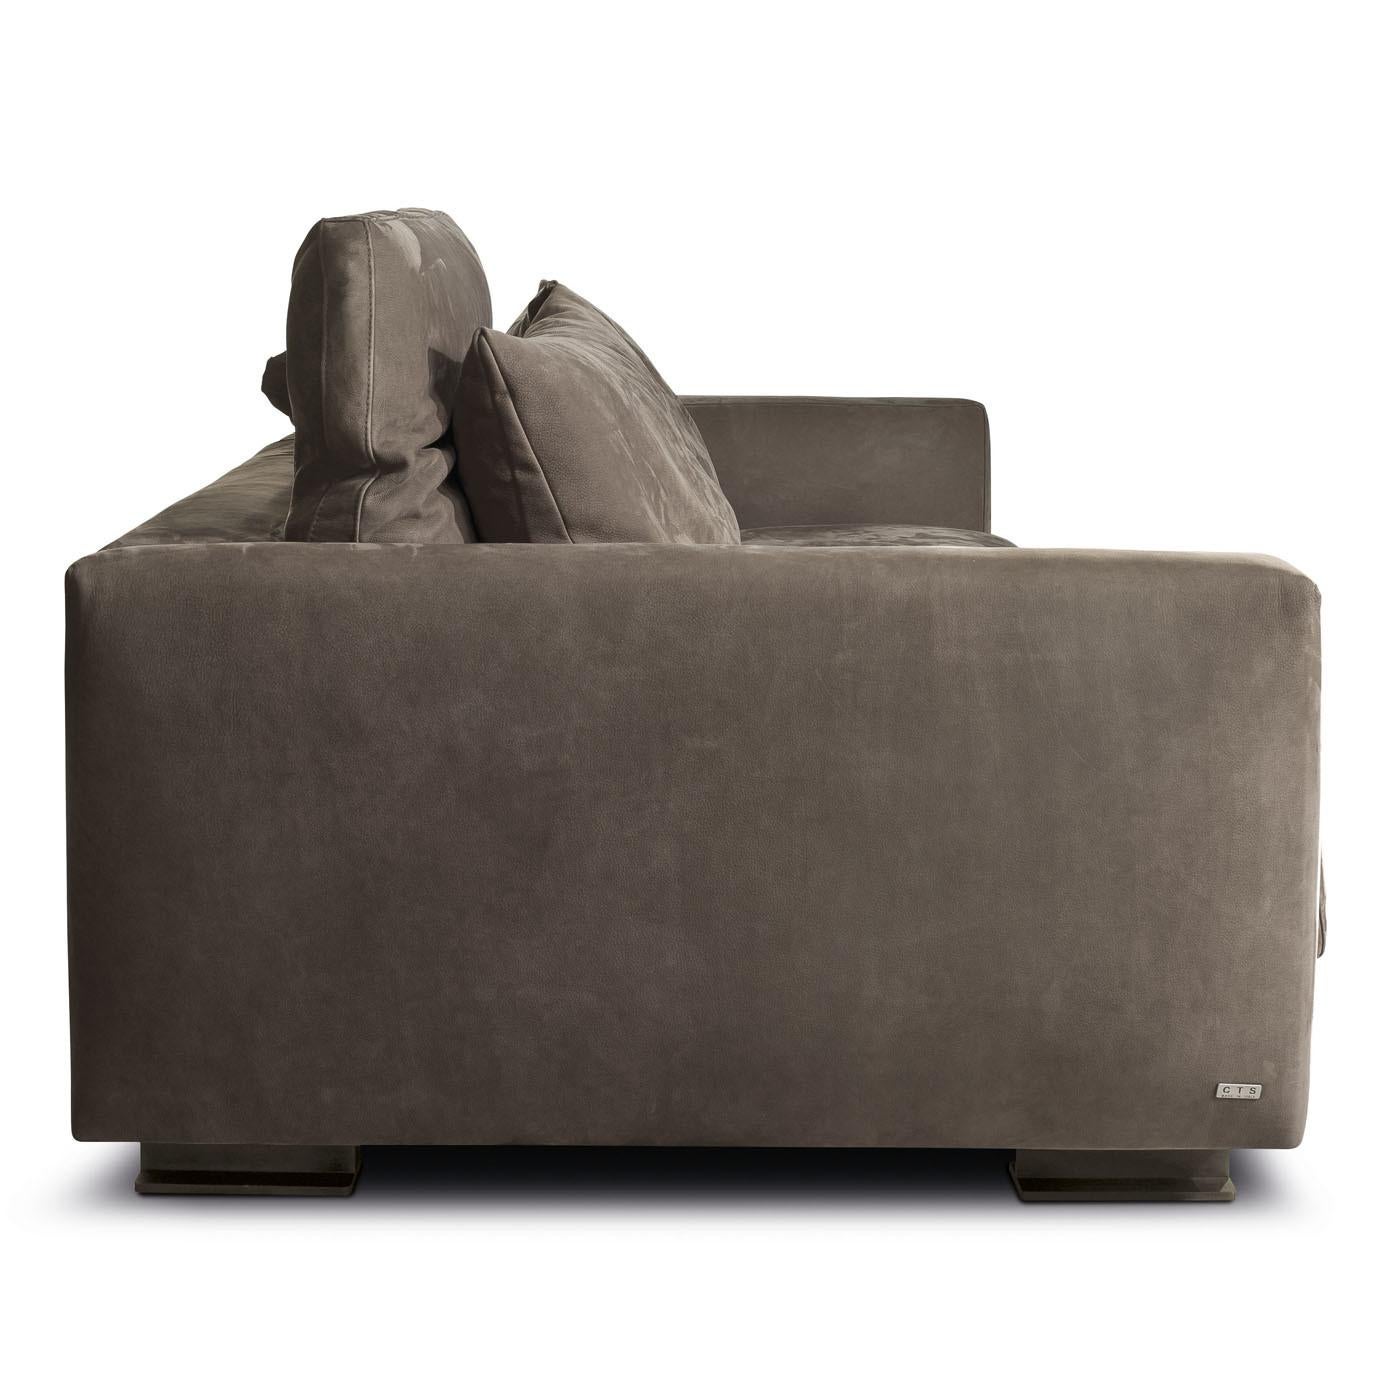 A statement piece in a modern or classic living room, the cushy padding of this sofa is made of goose down with polyurethane inserts (available also only in polyurethane). Part of the Flap series characterized by an adjustable backrest, the frame is